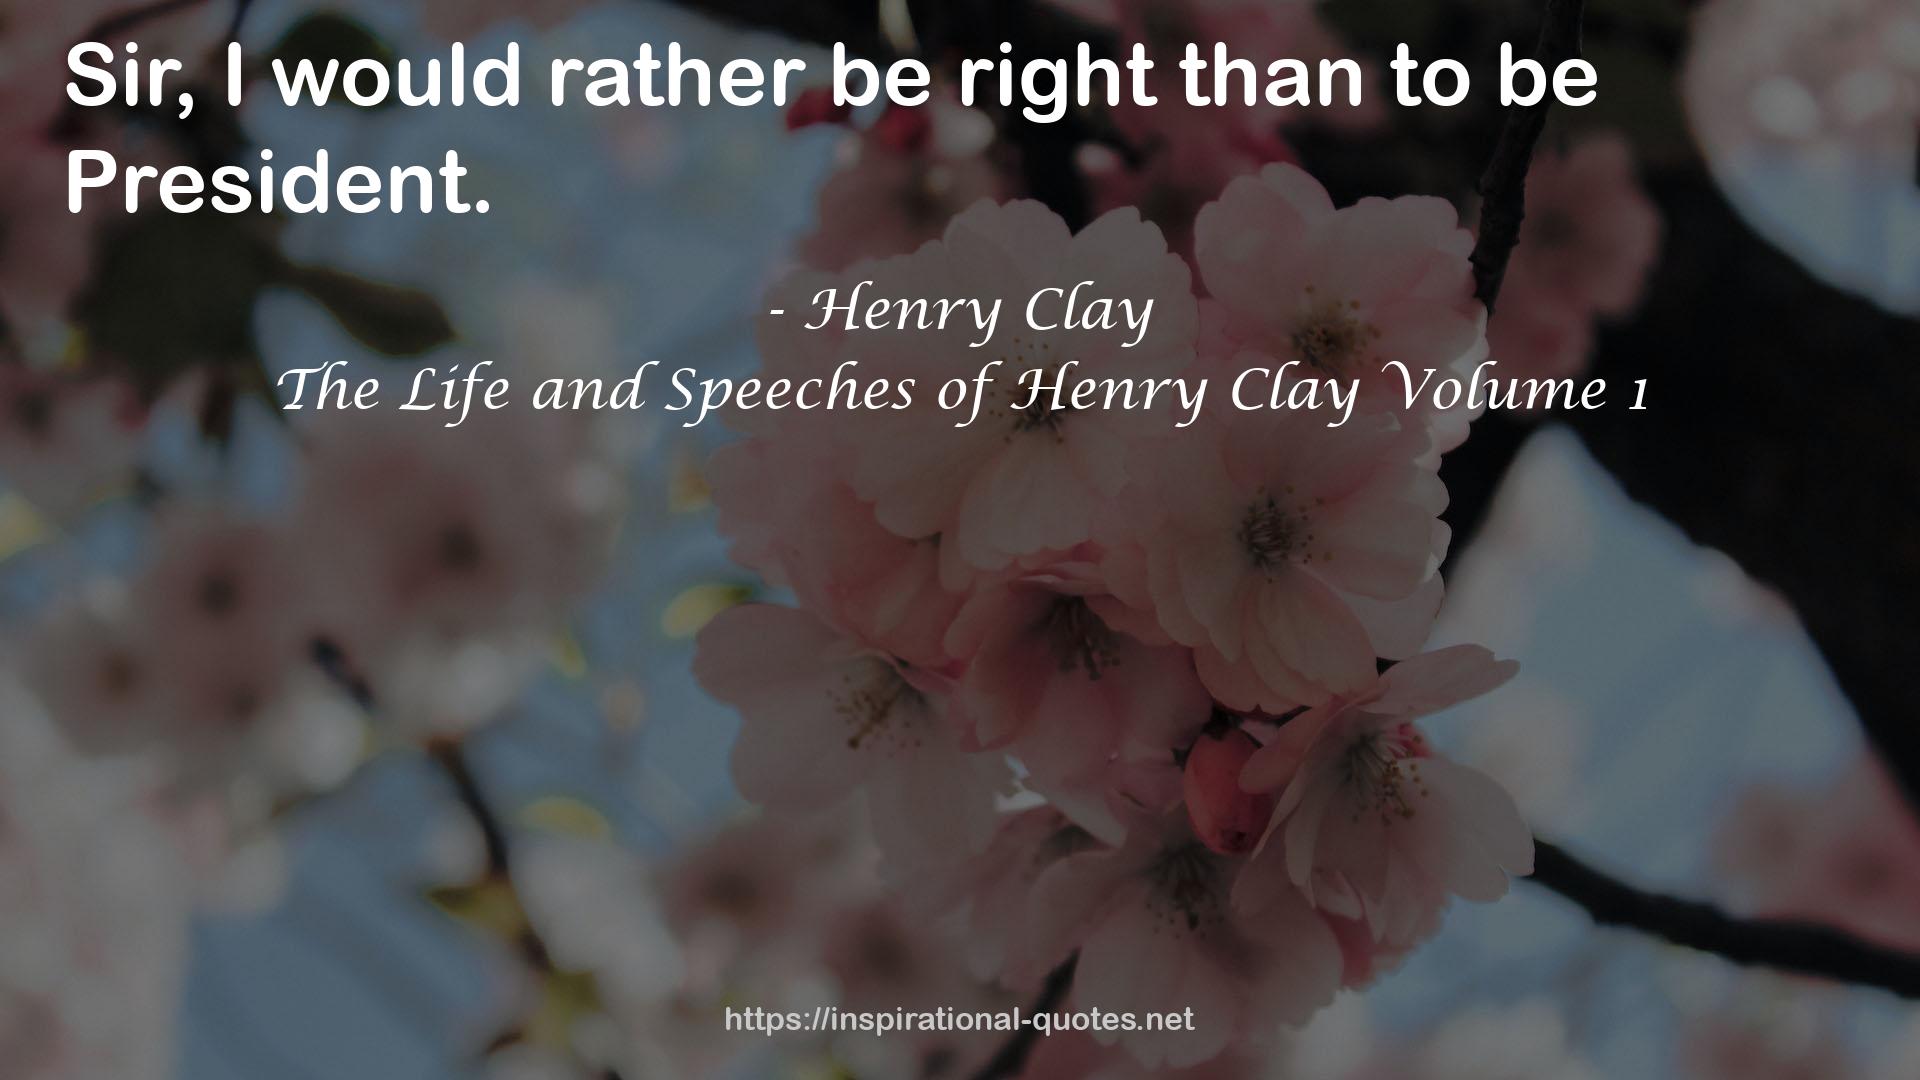 The Life and Speeches of Henry Clay Volume 1 QUOTES